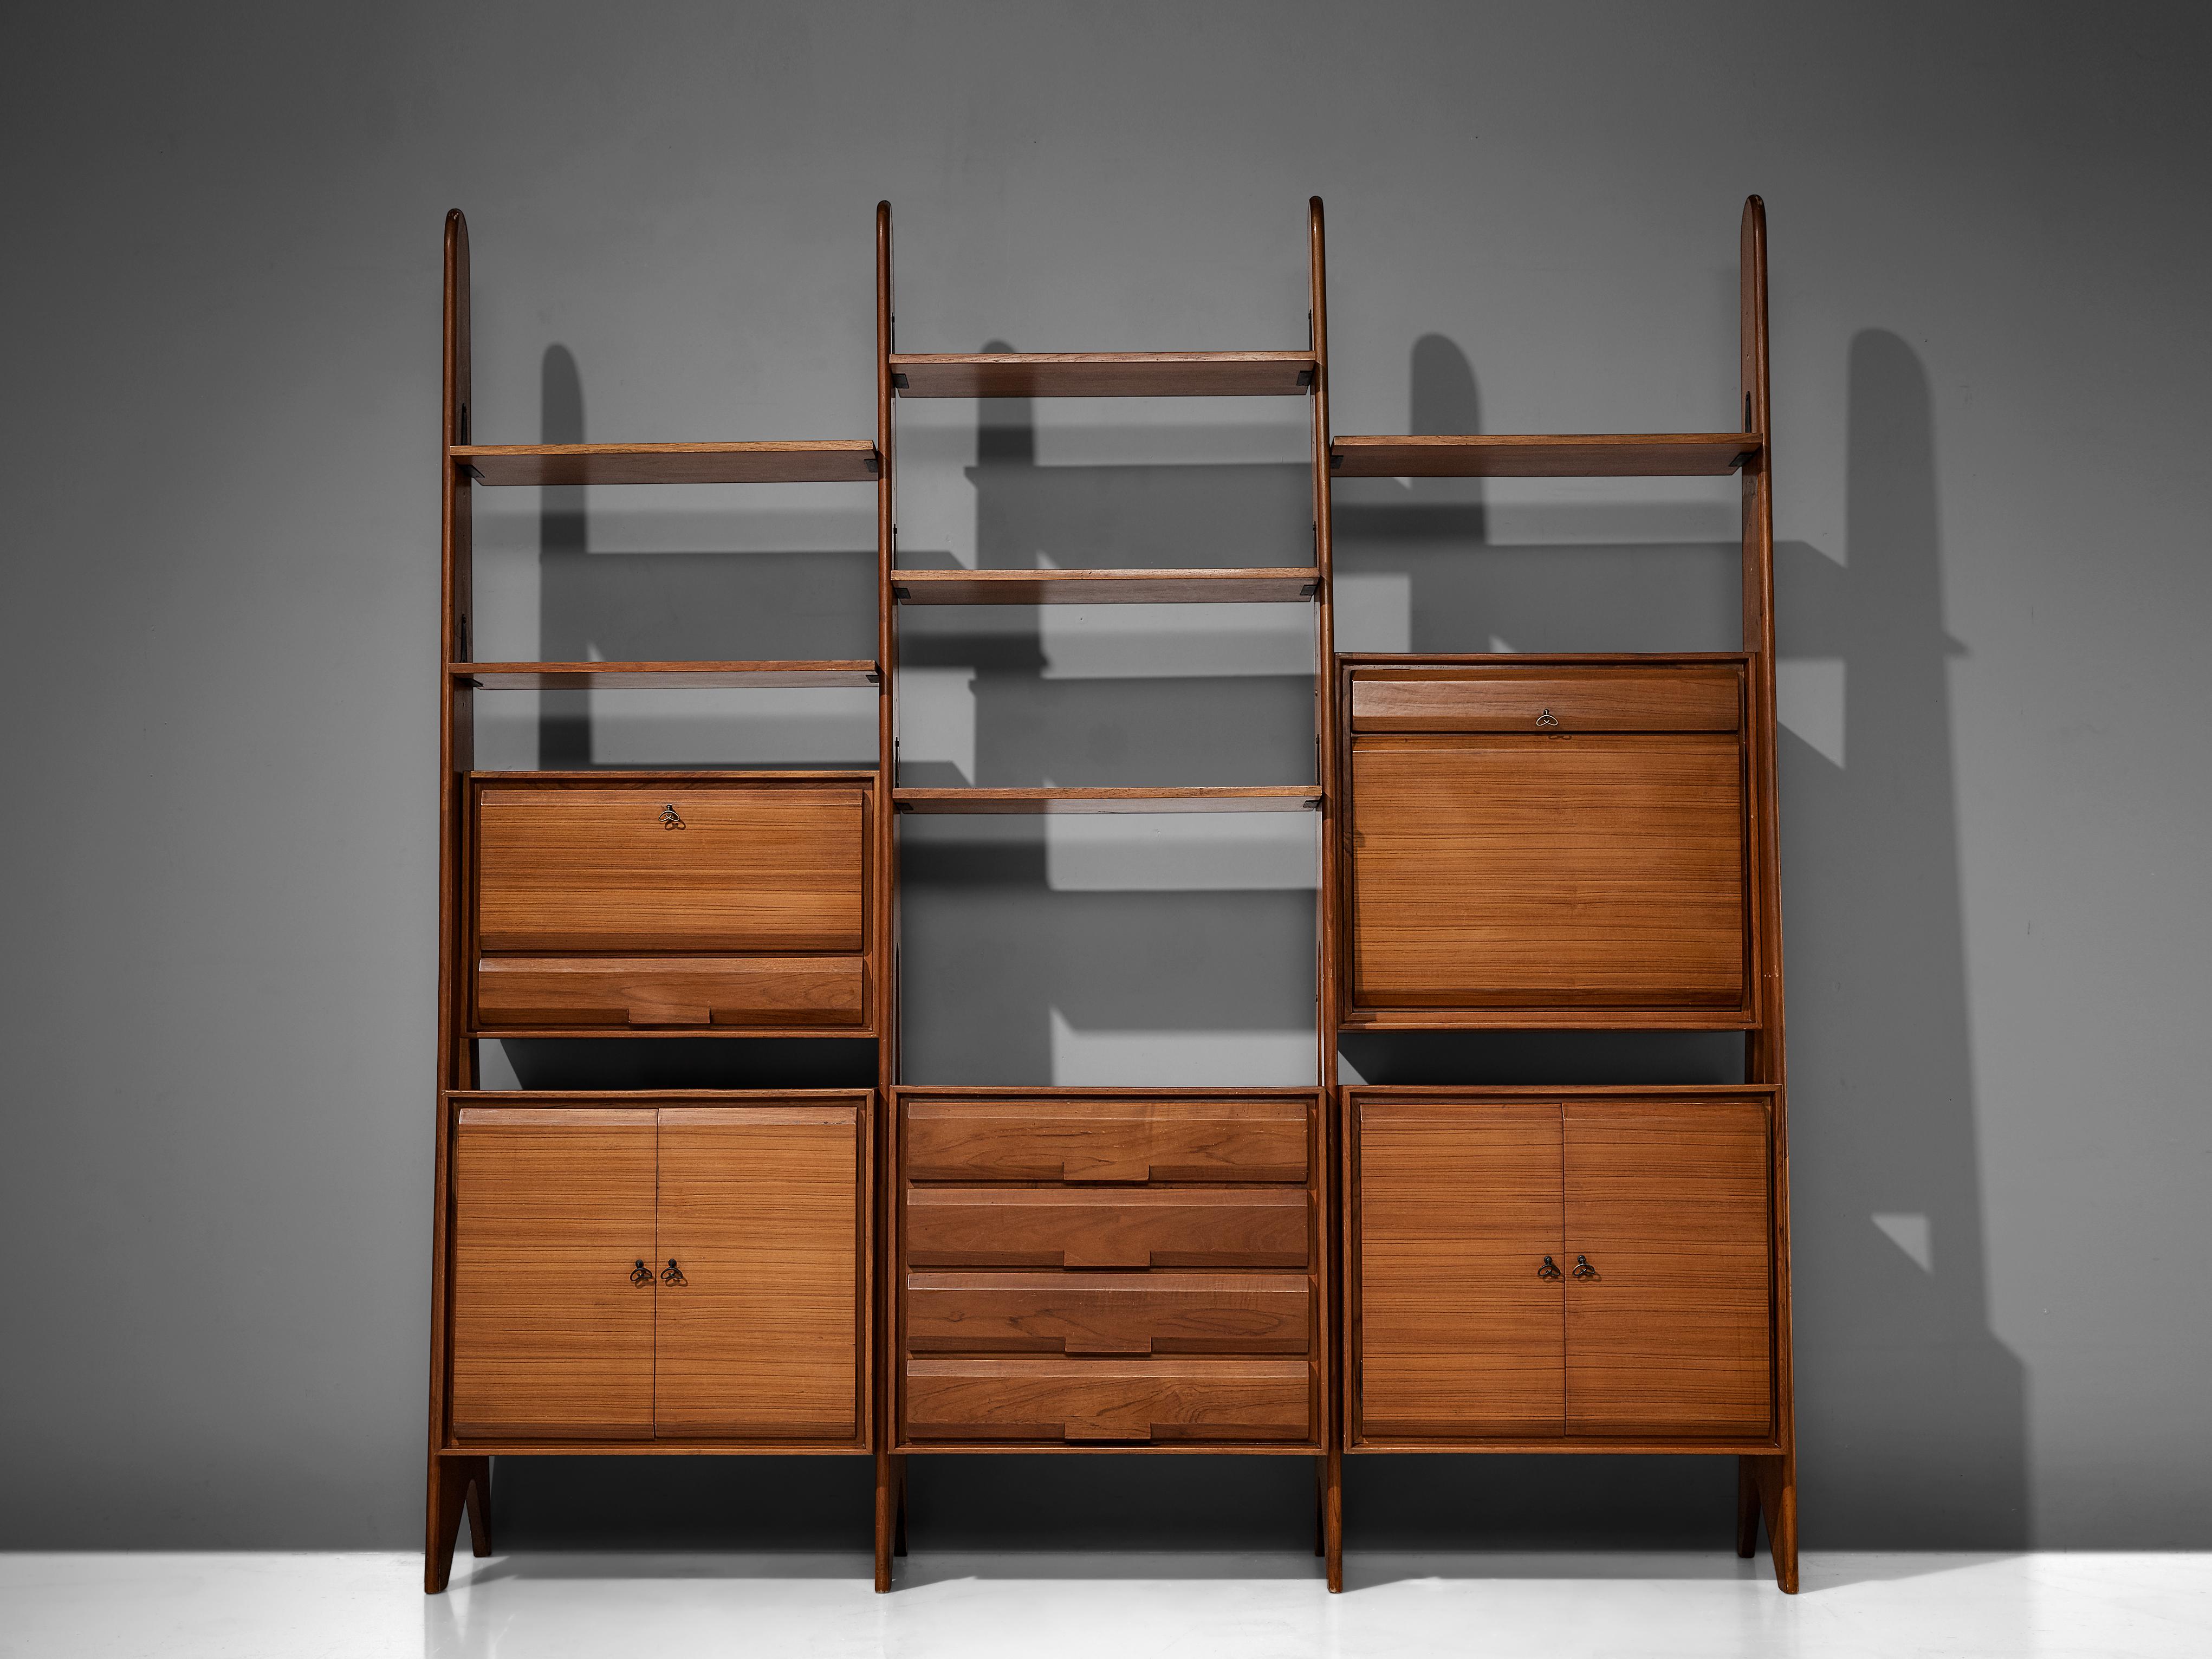 Large Italian shelf, wood, metal, Italy, 1960s.

The monumental wall-mounted cabinet consists of three compartments with various different storage facilities. The shelves and compartments are directly mounted on the brad wooden frames. The storage